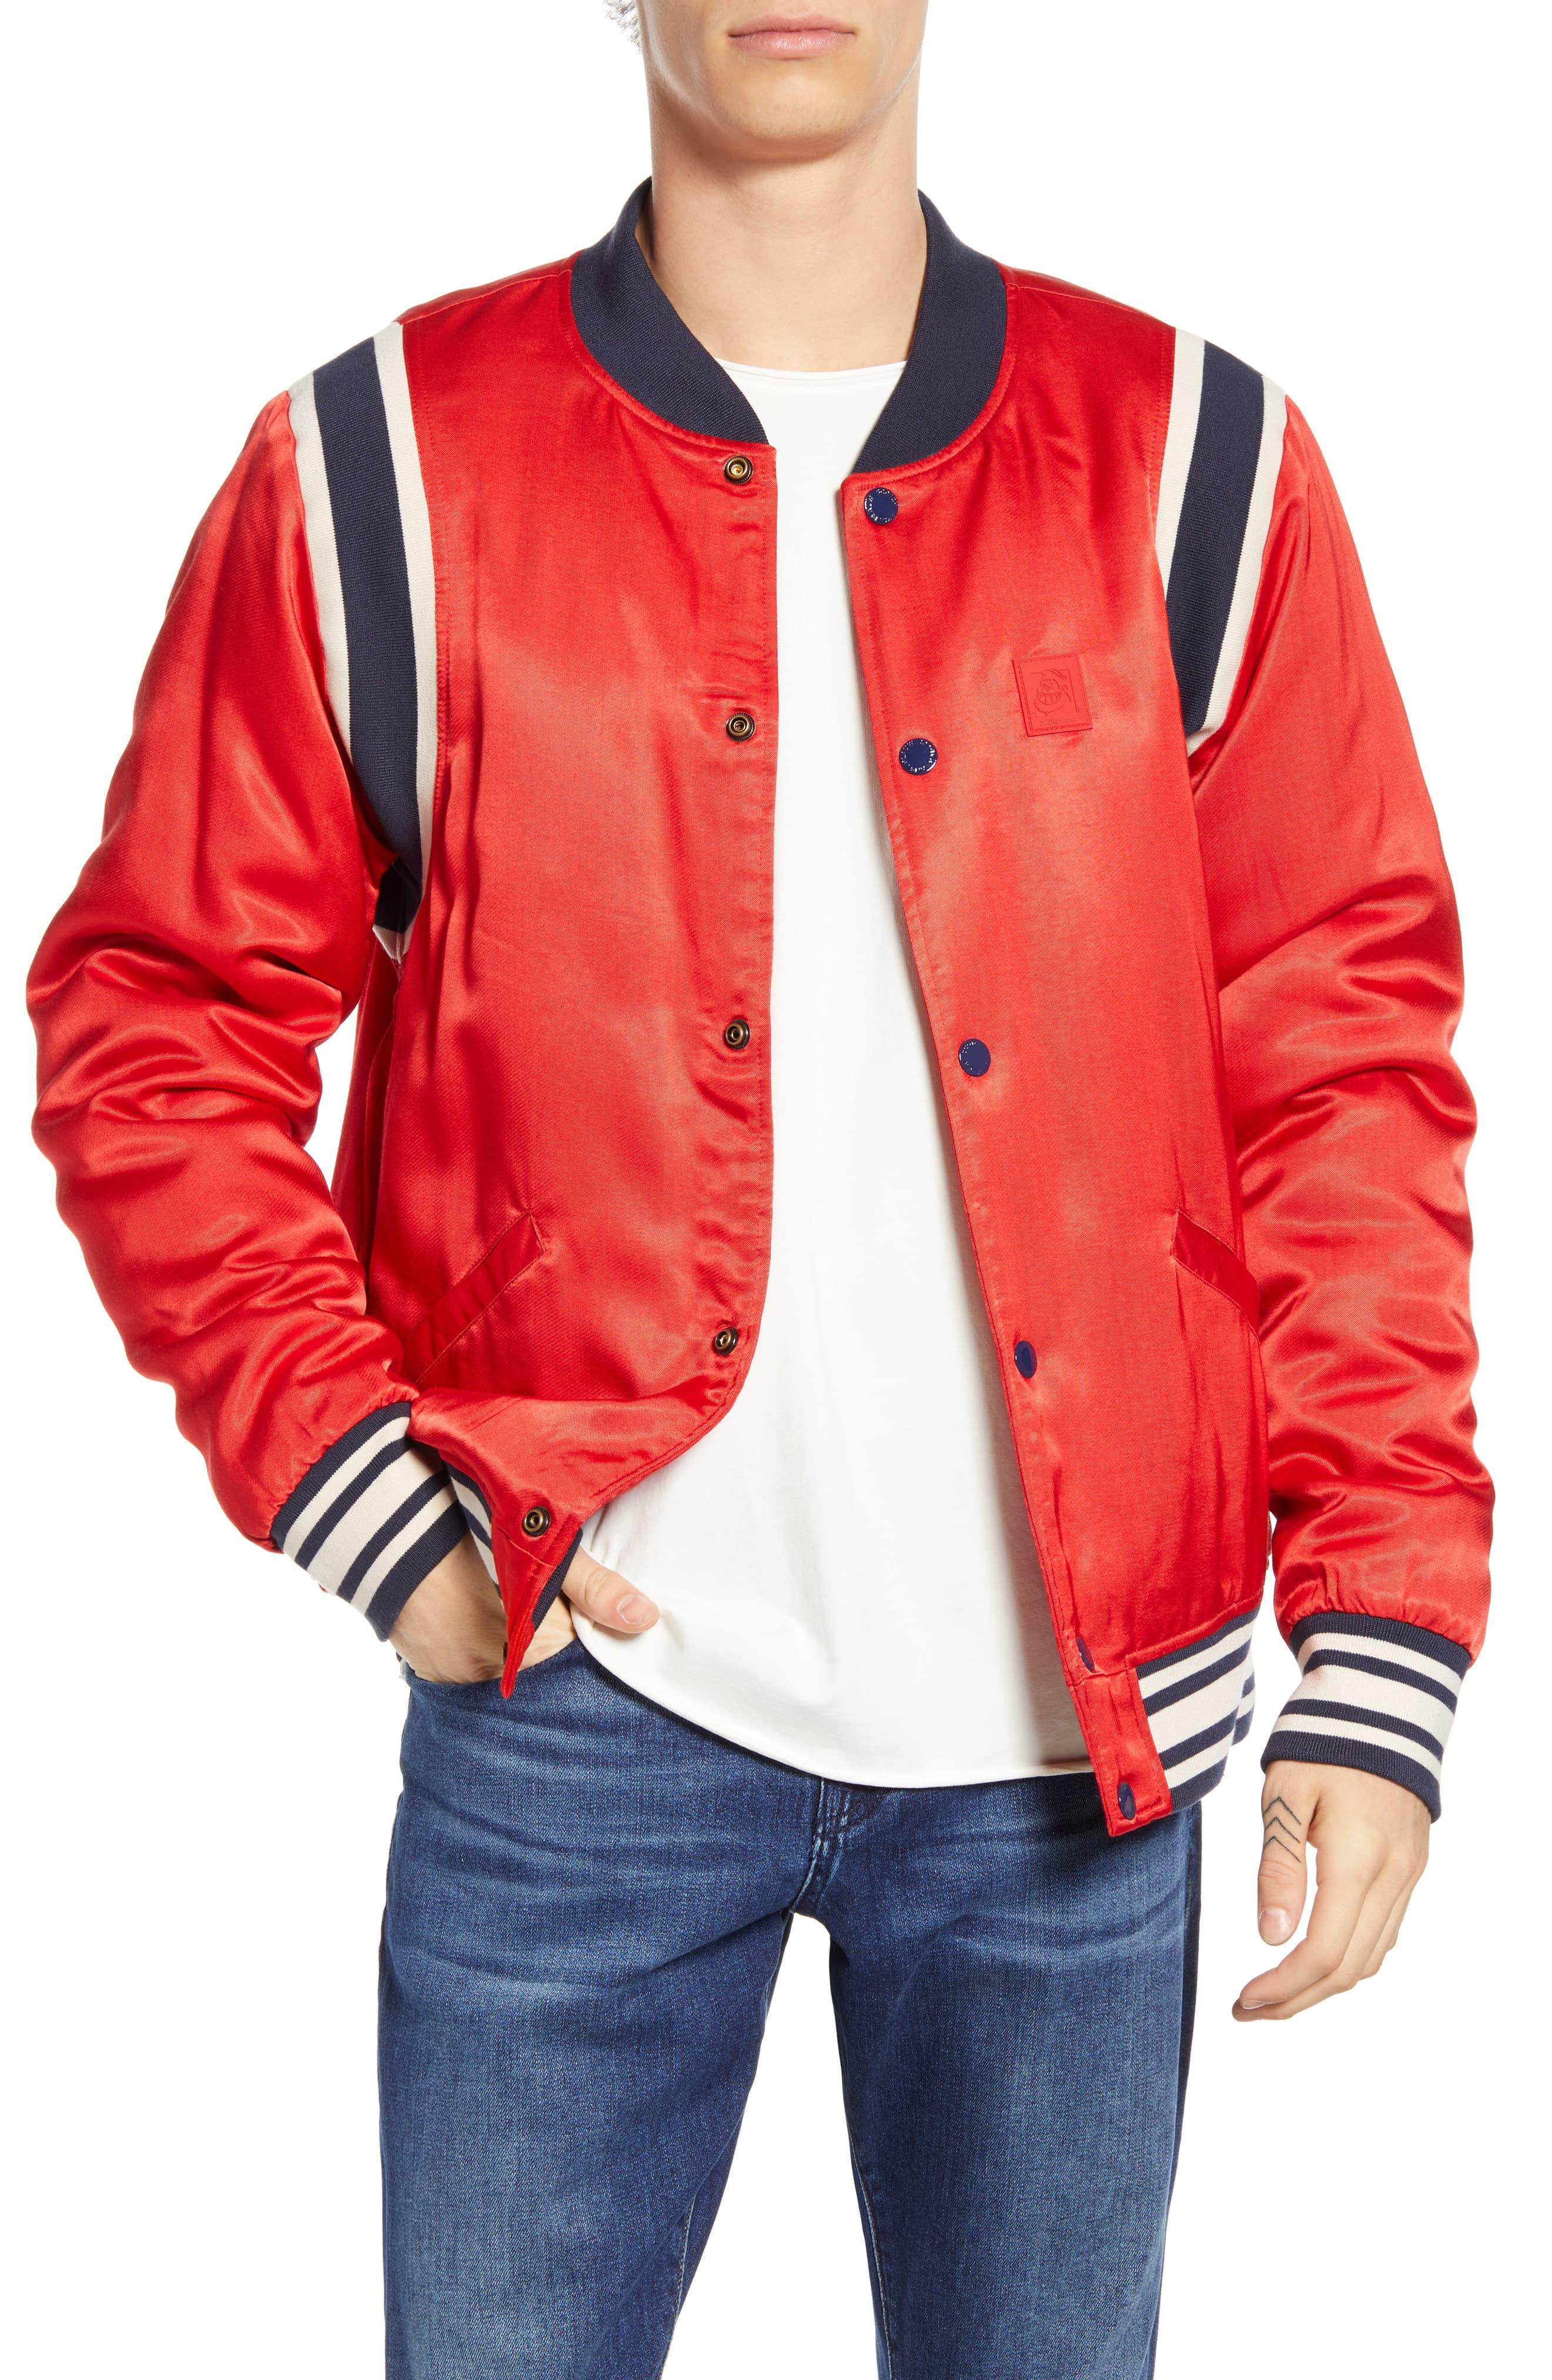 Scotch & Soda Brutus Bomber Jacket in Red for Men - Lyst